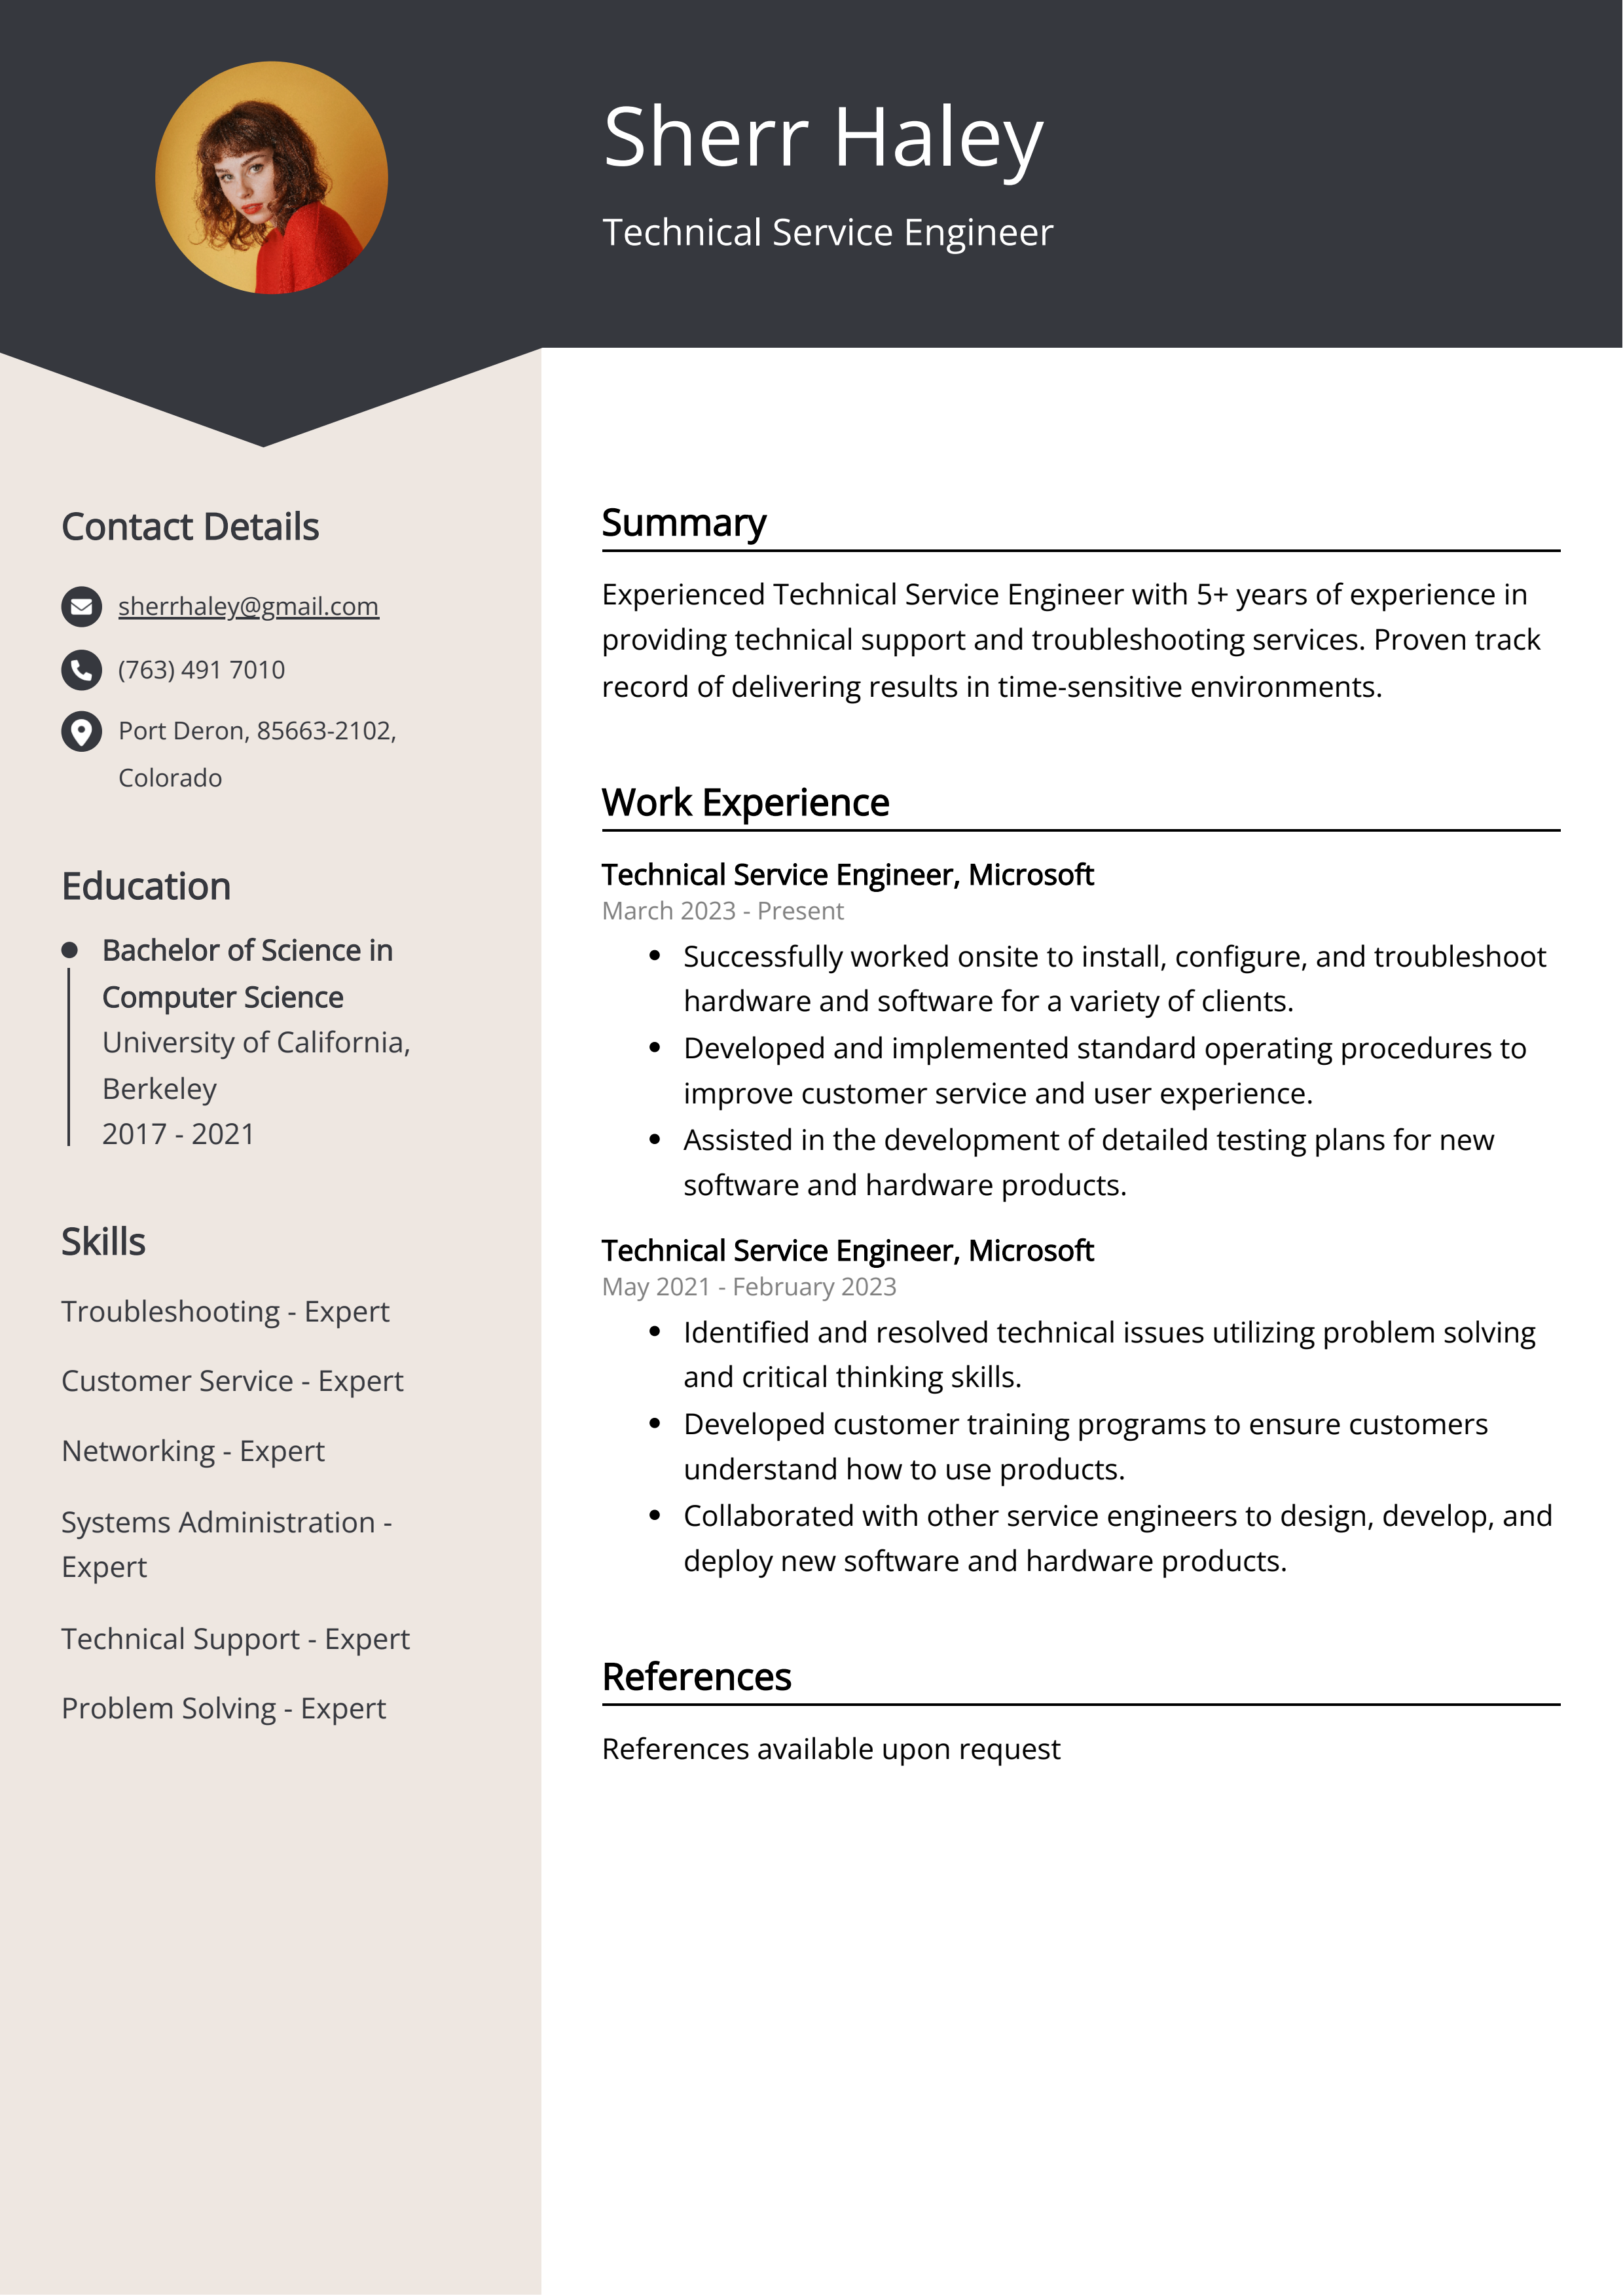 Technical Service Engineer Resume Example